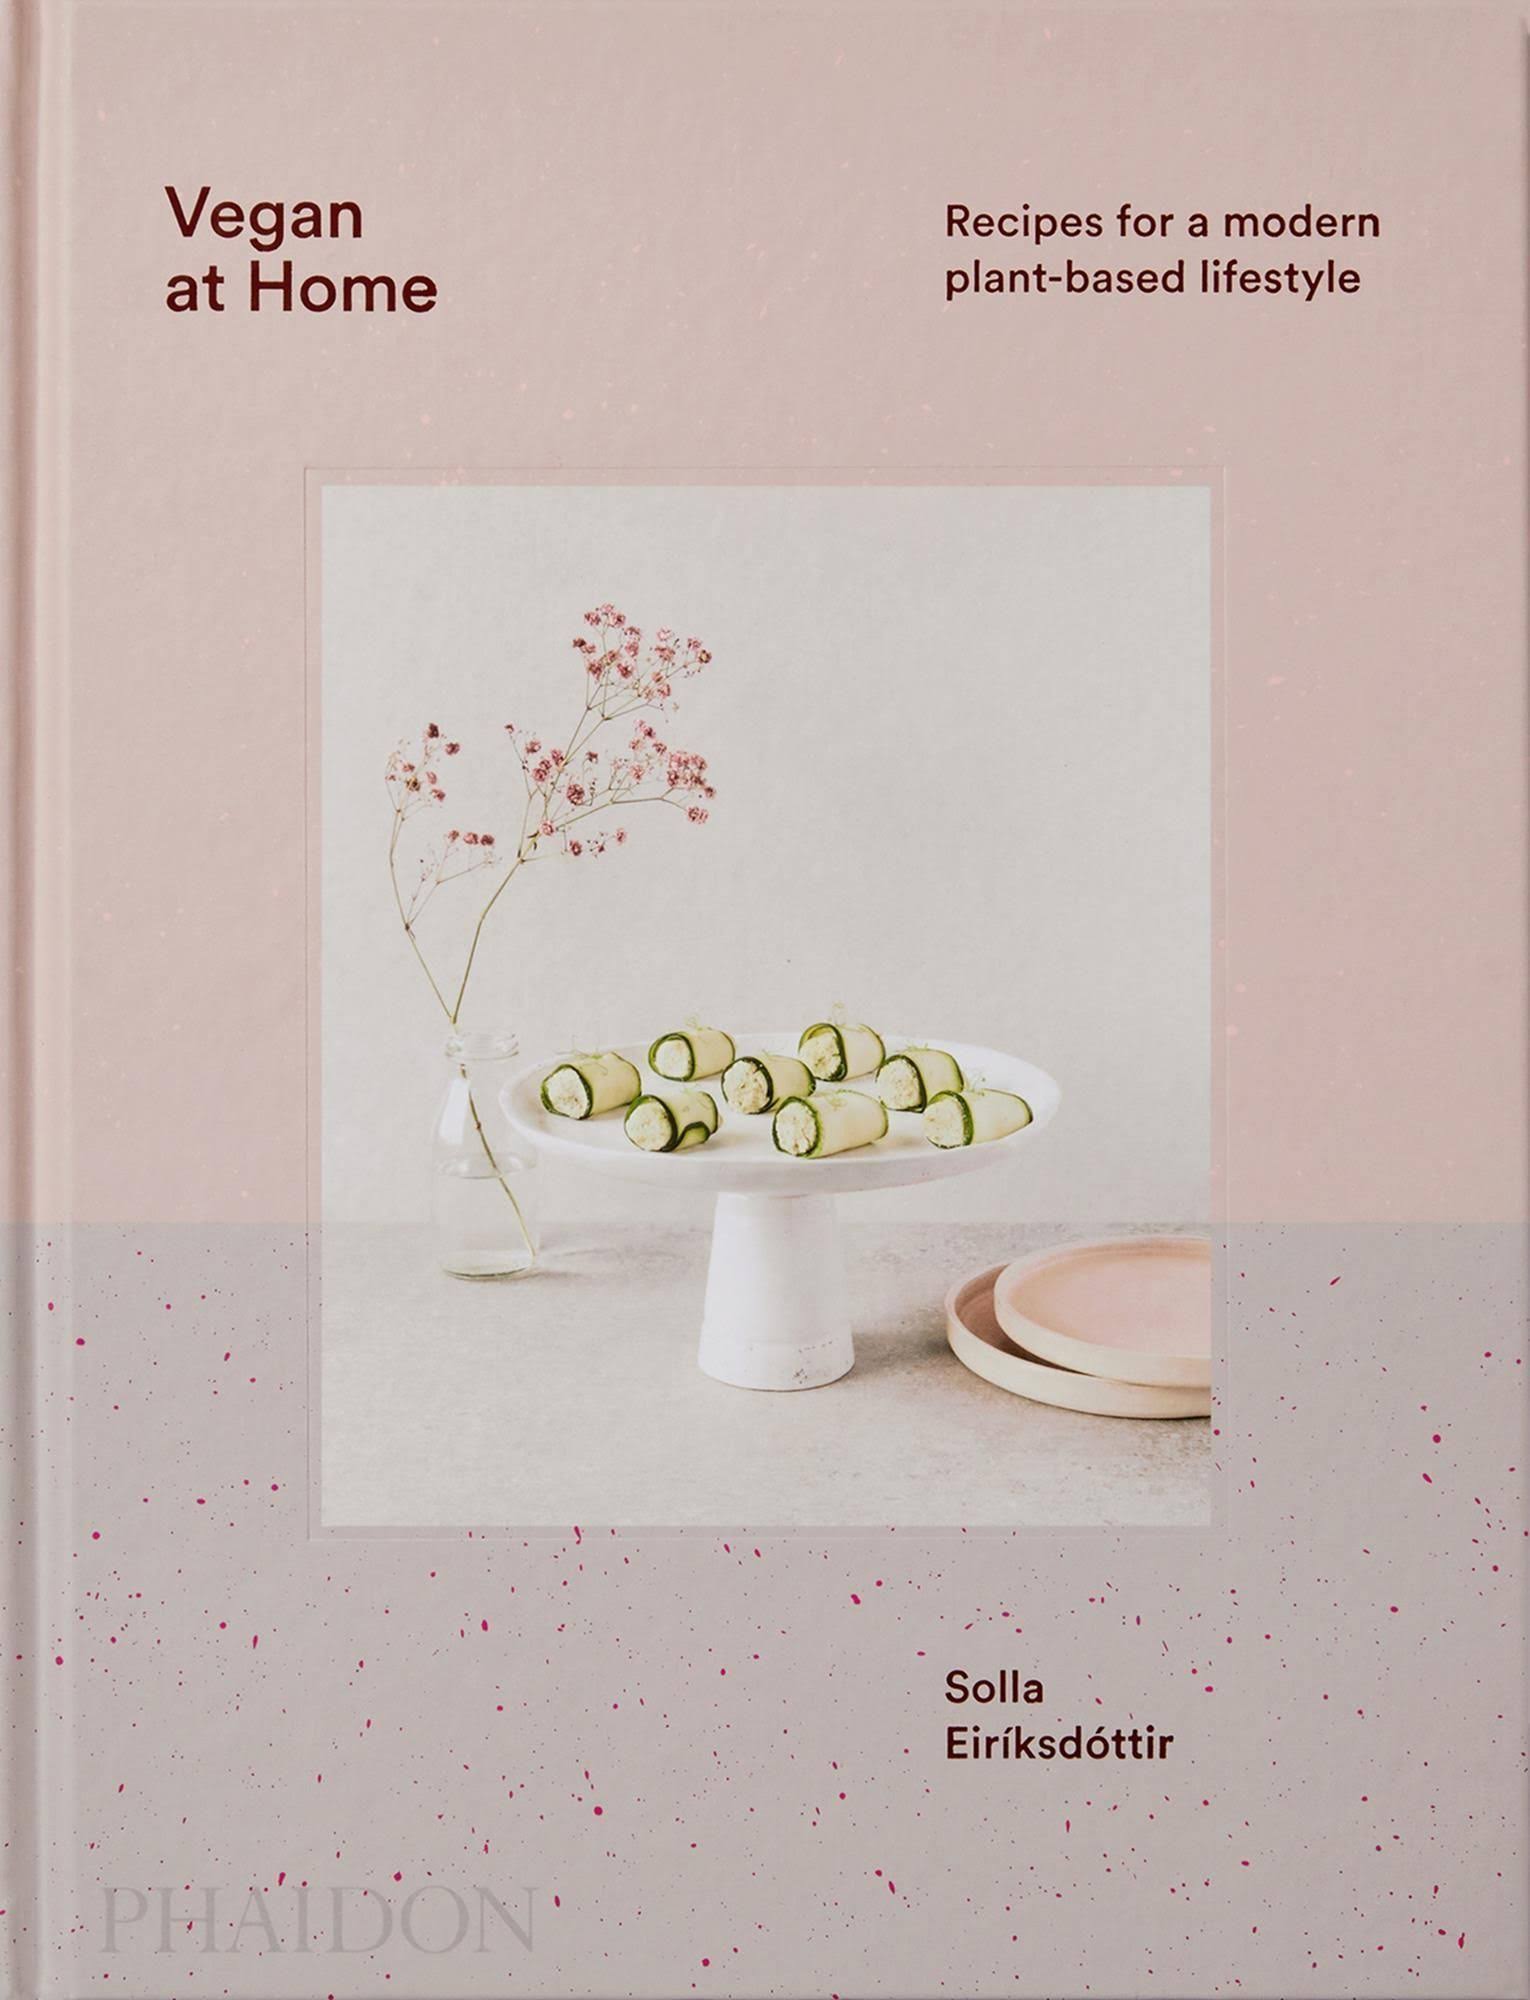 Vegan at Home: Recipes for a Modern Plant-Based Lifestyle [Book]